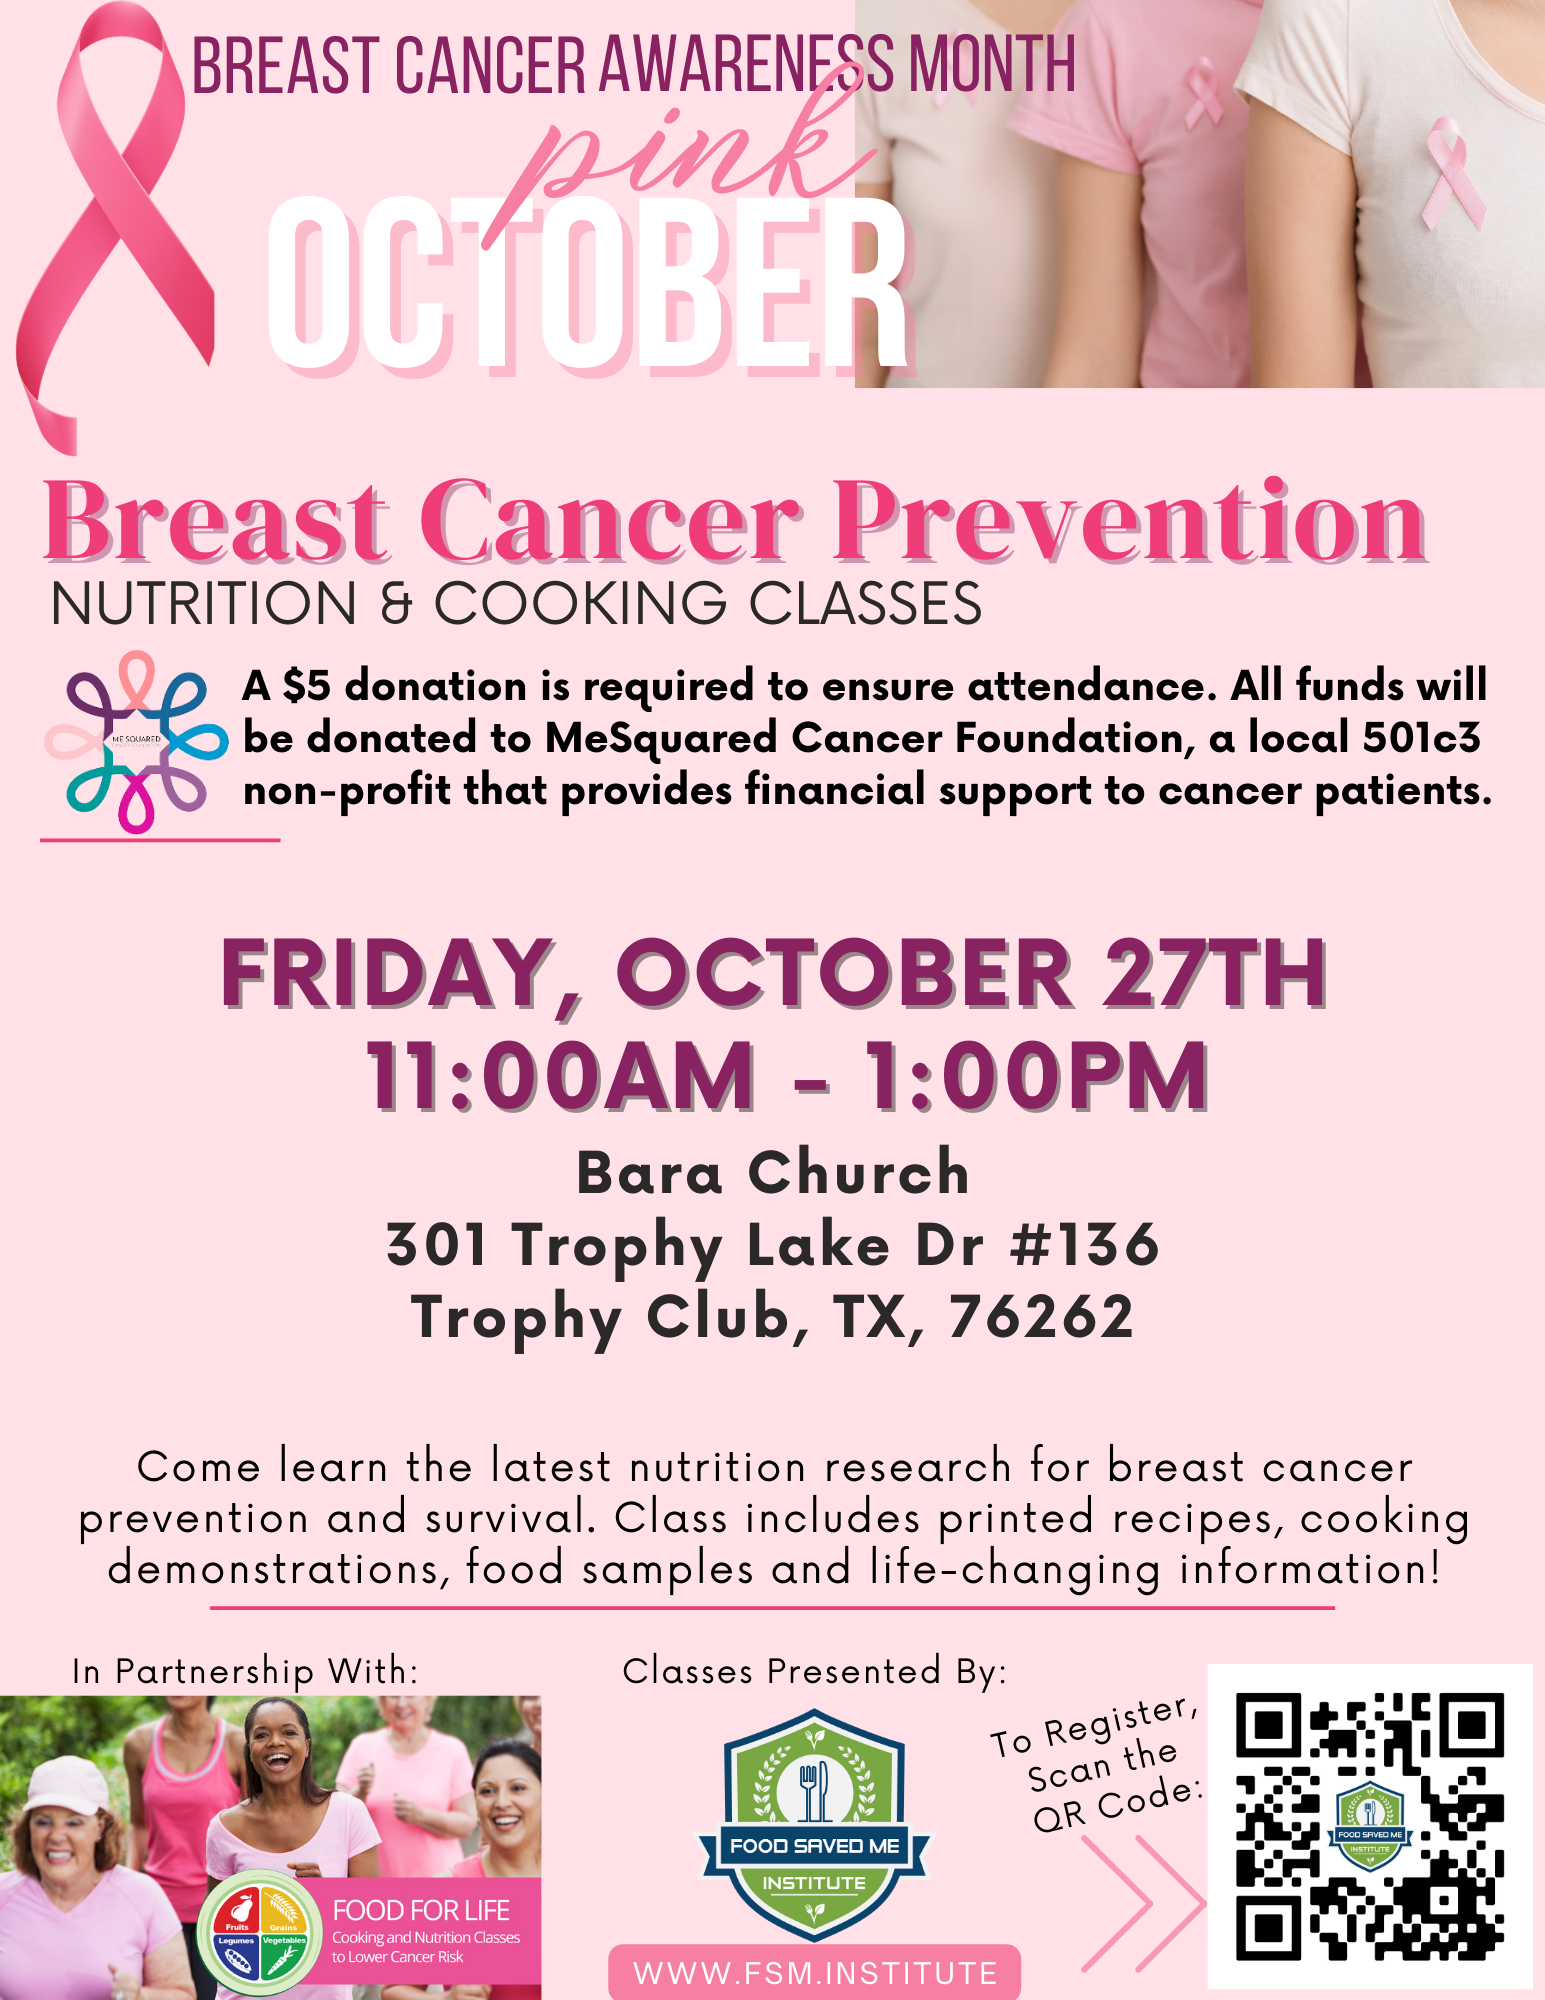 Breast cancer prevention at Bara Church